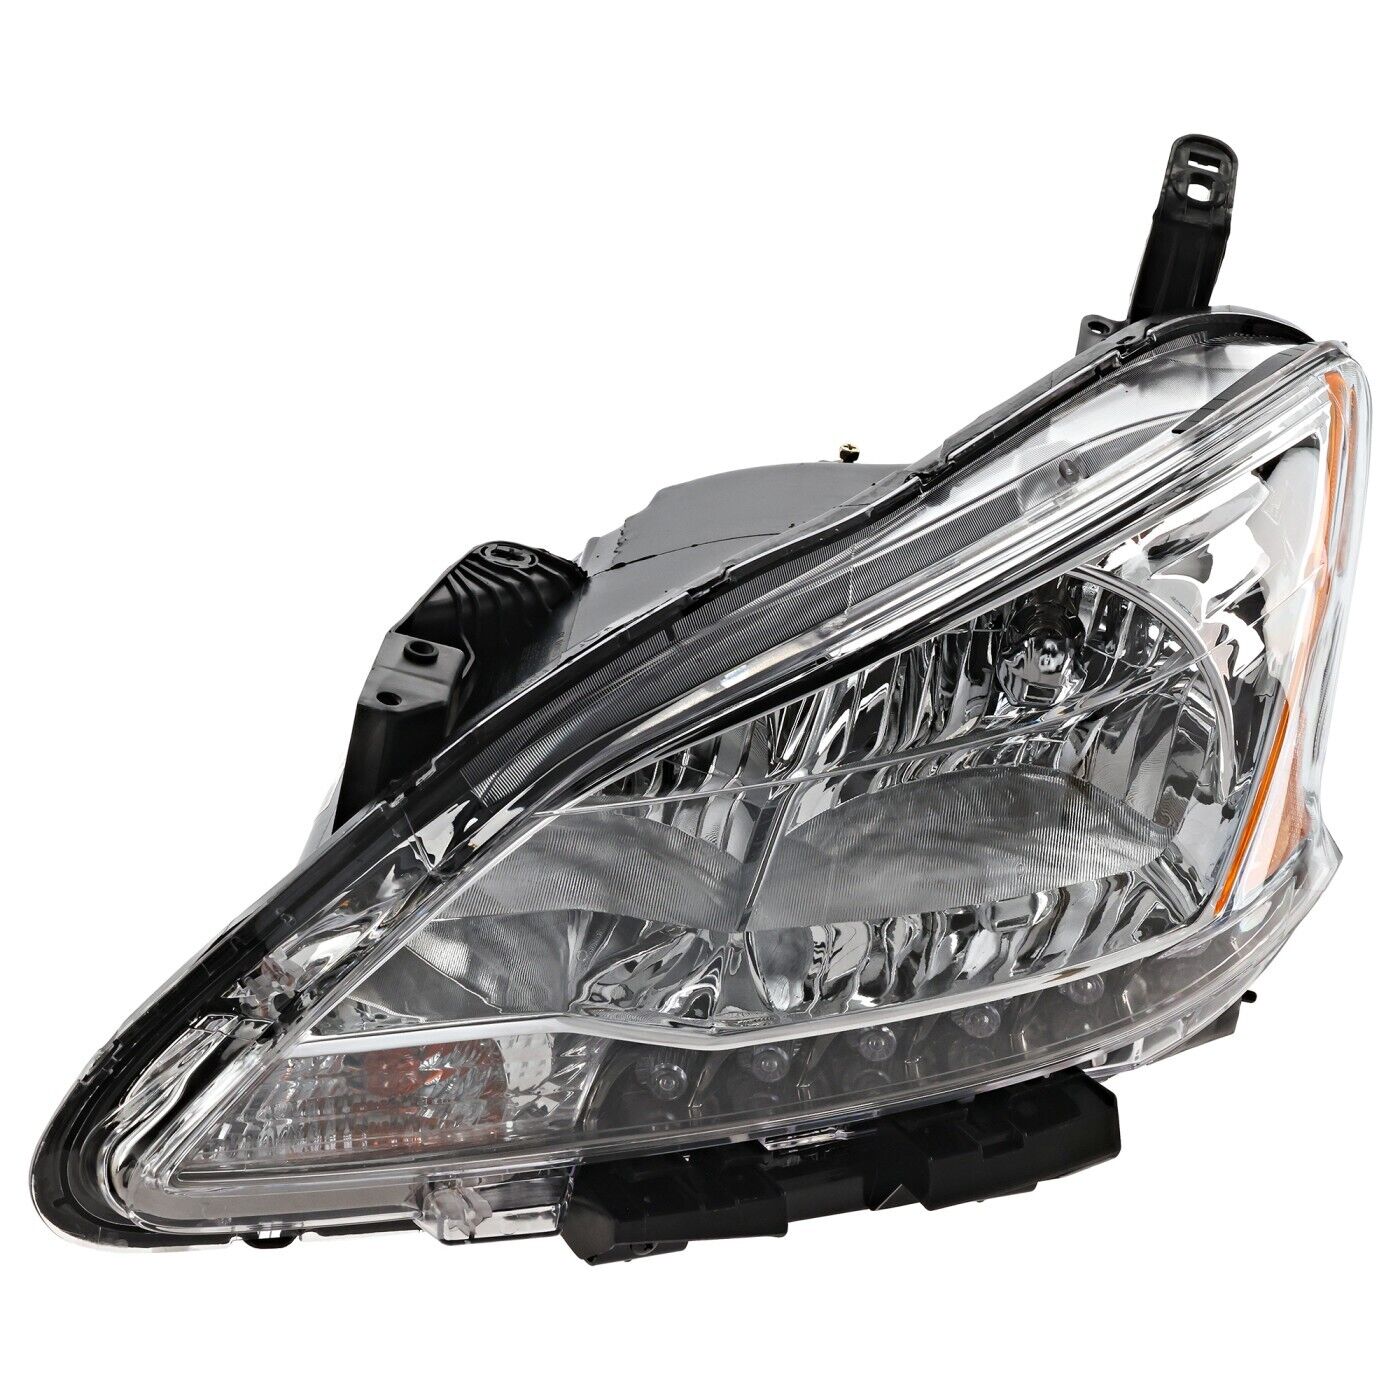 Headlight For 2013 2014 2015 Nissan Sentra Left With Socket and Wiring